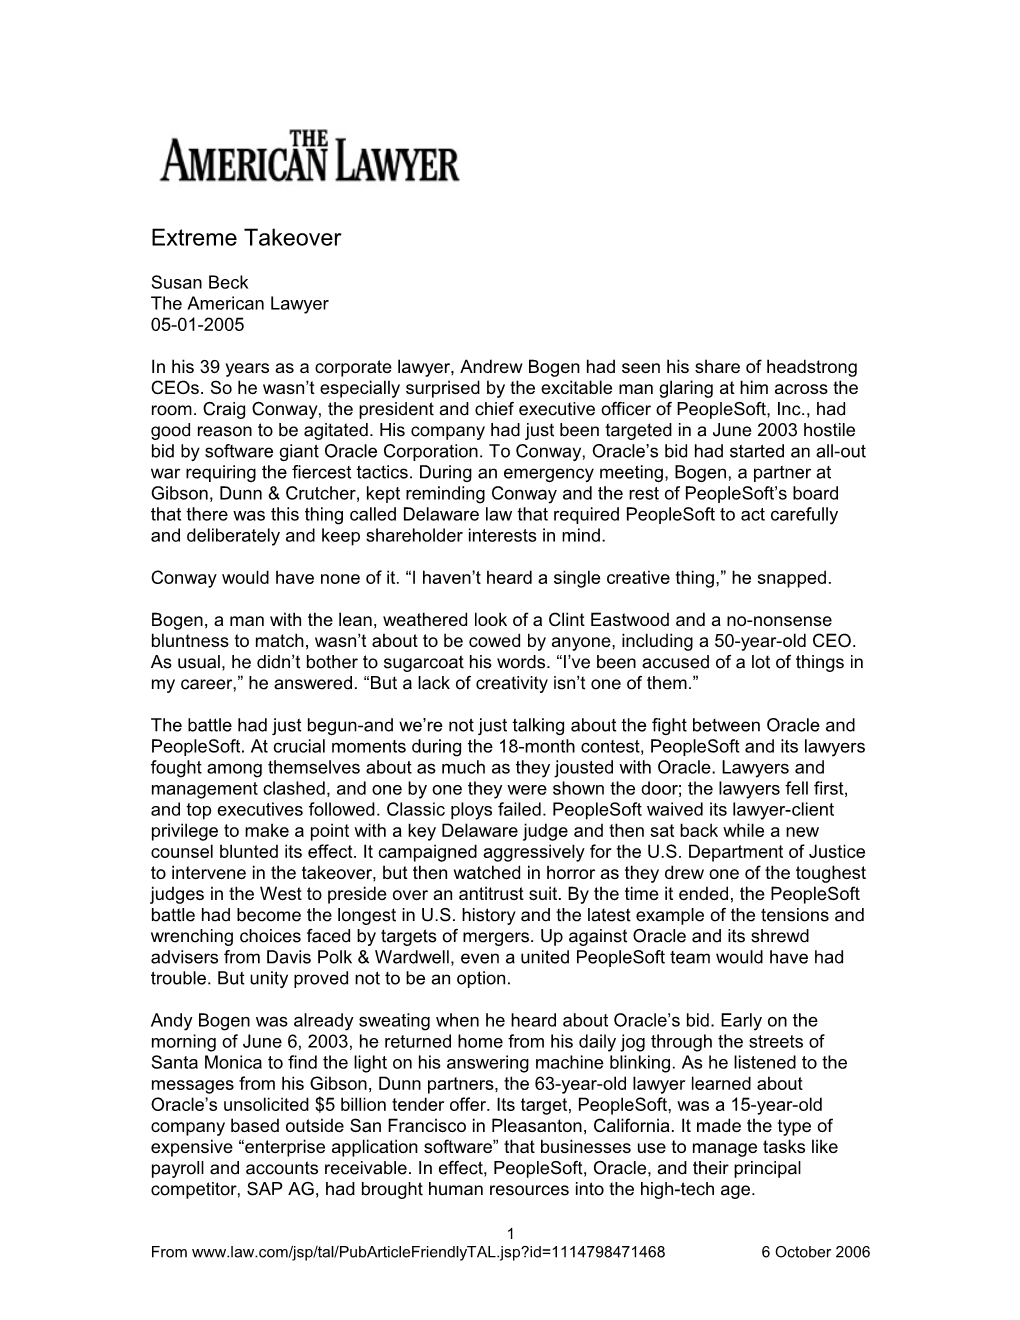 Extreme Takeover Susan Beck the American Lawyer 05-01-2005 in His 39 Years As a Corporate